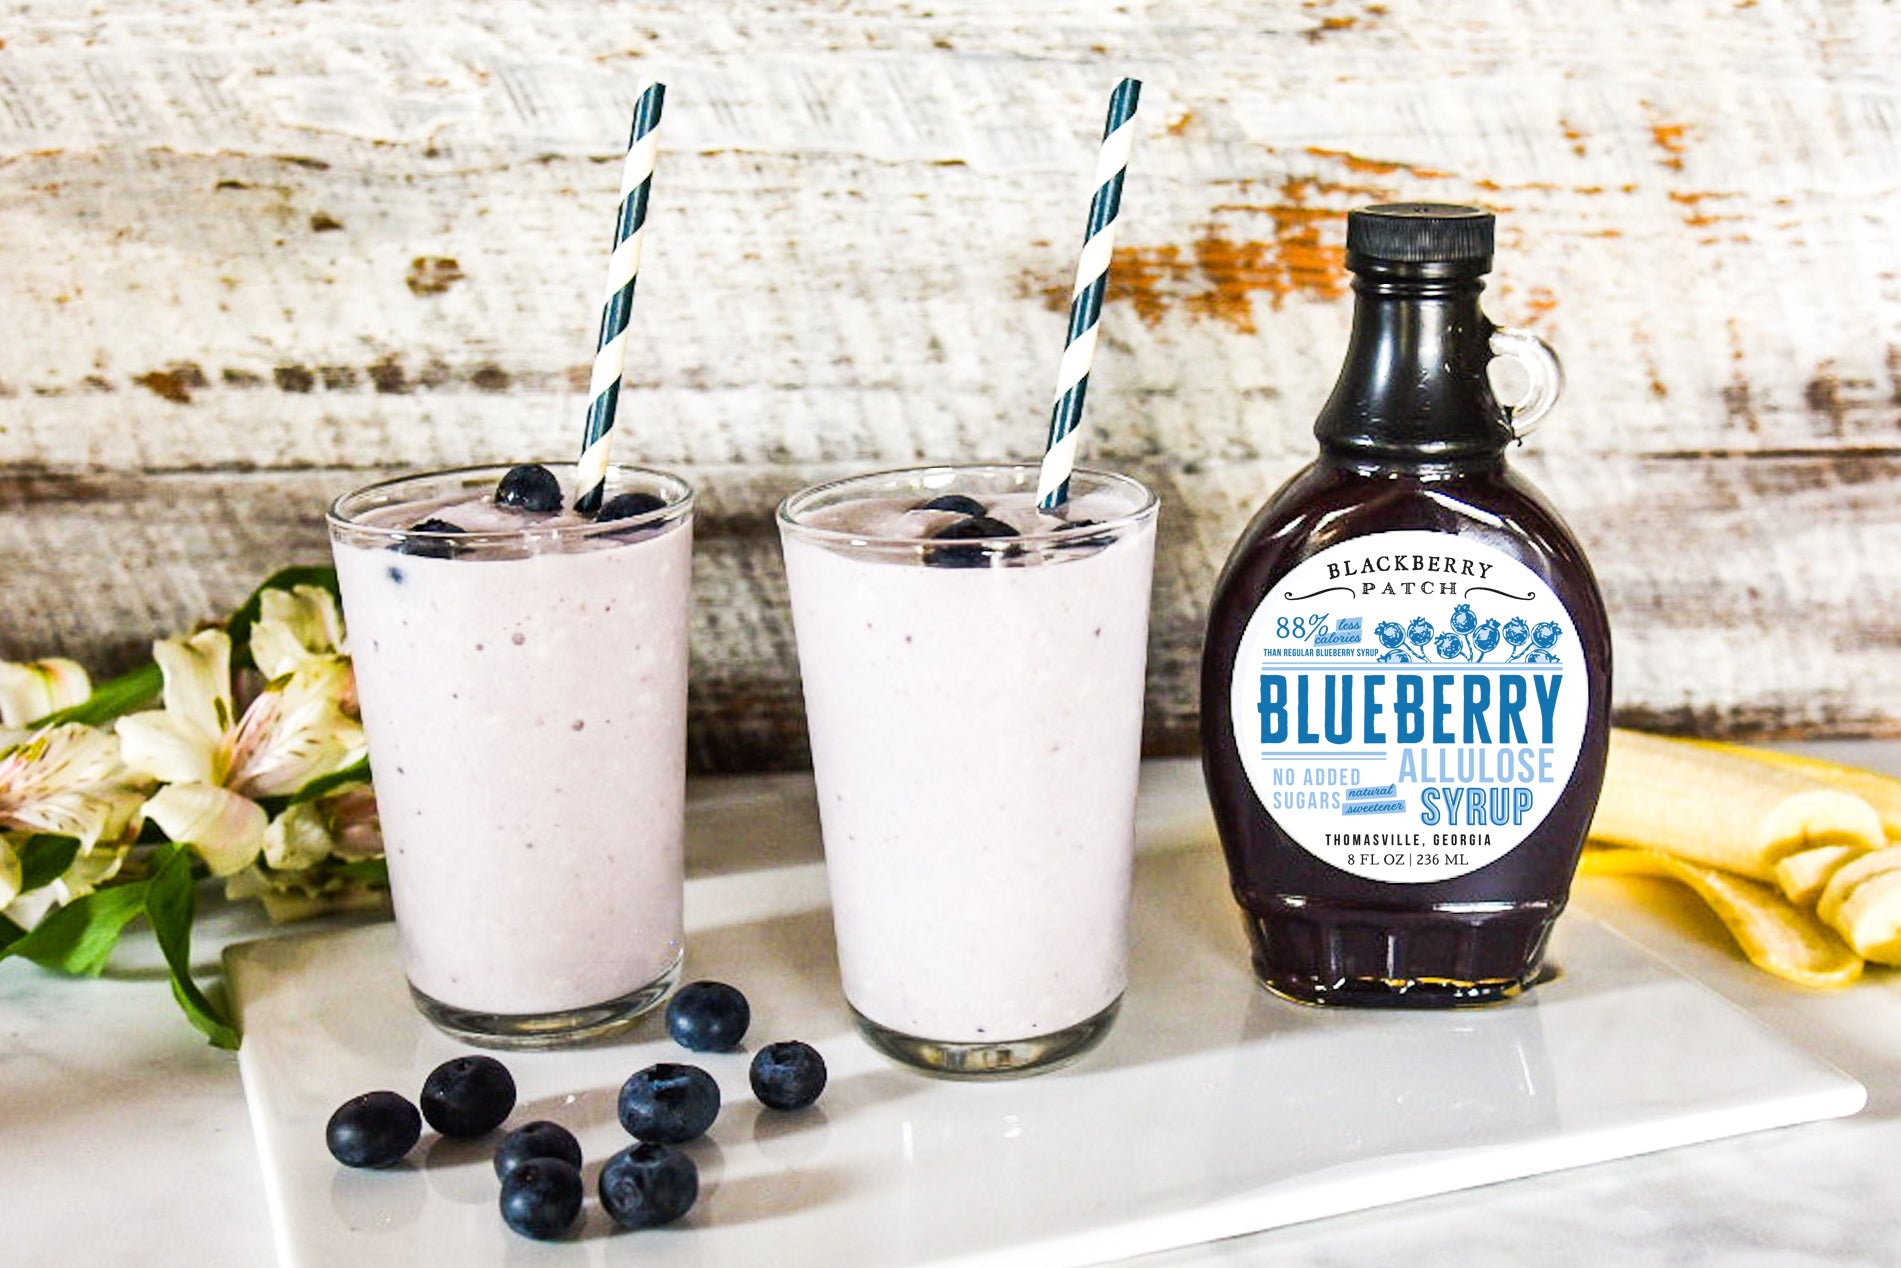 Recipe photo of Blueberry Banana Smoothie using Blackberry Patch Blueberry Allulose Syrup